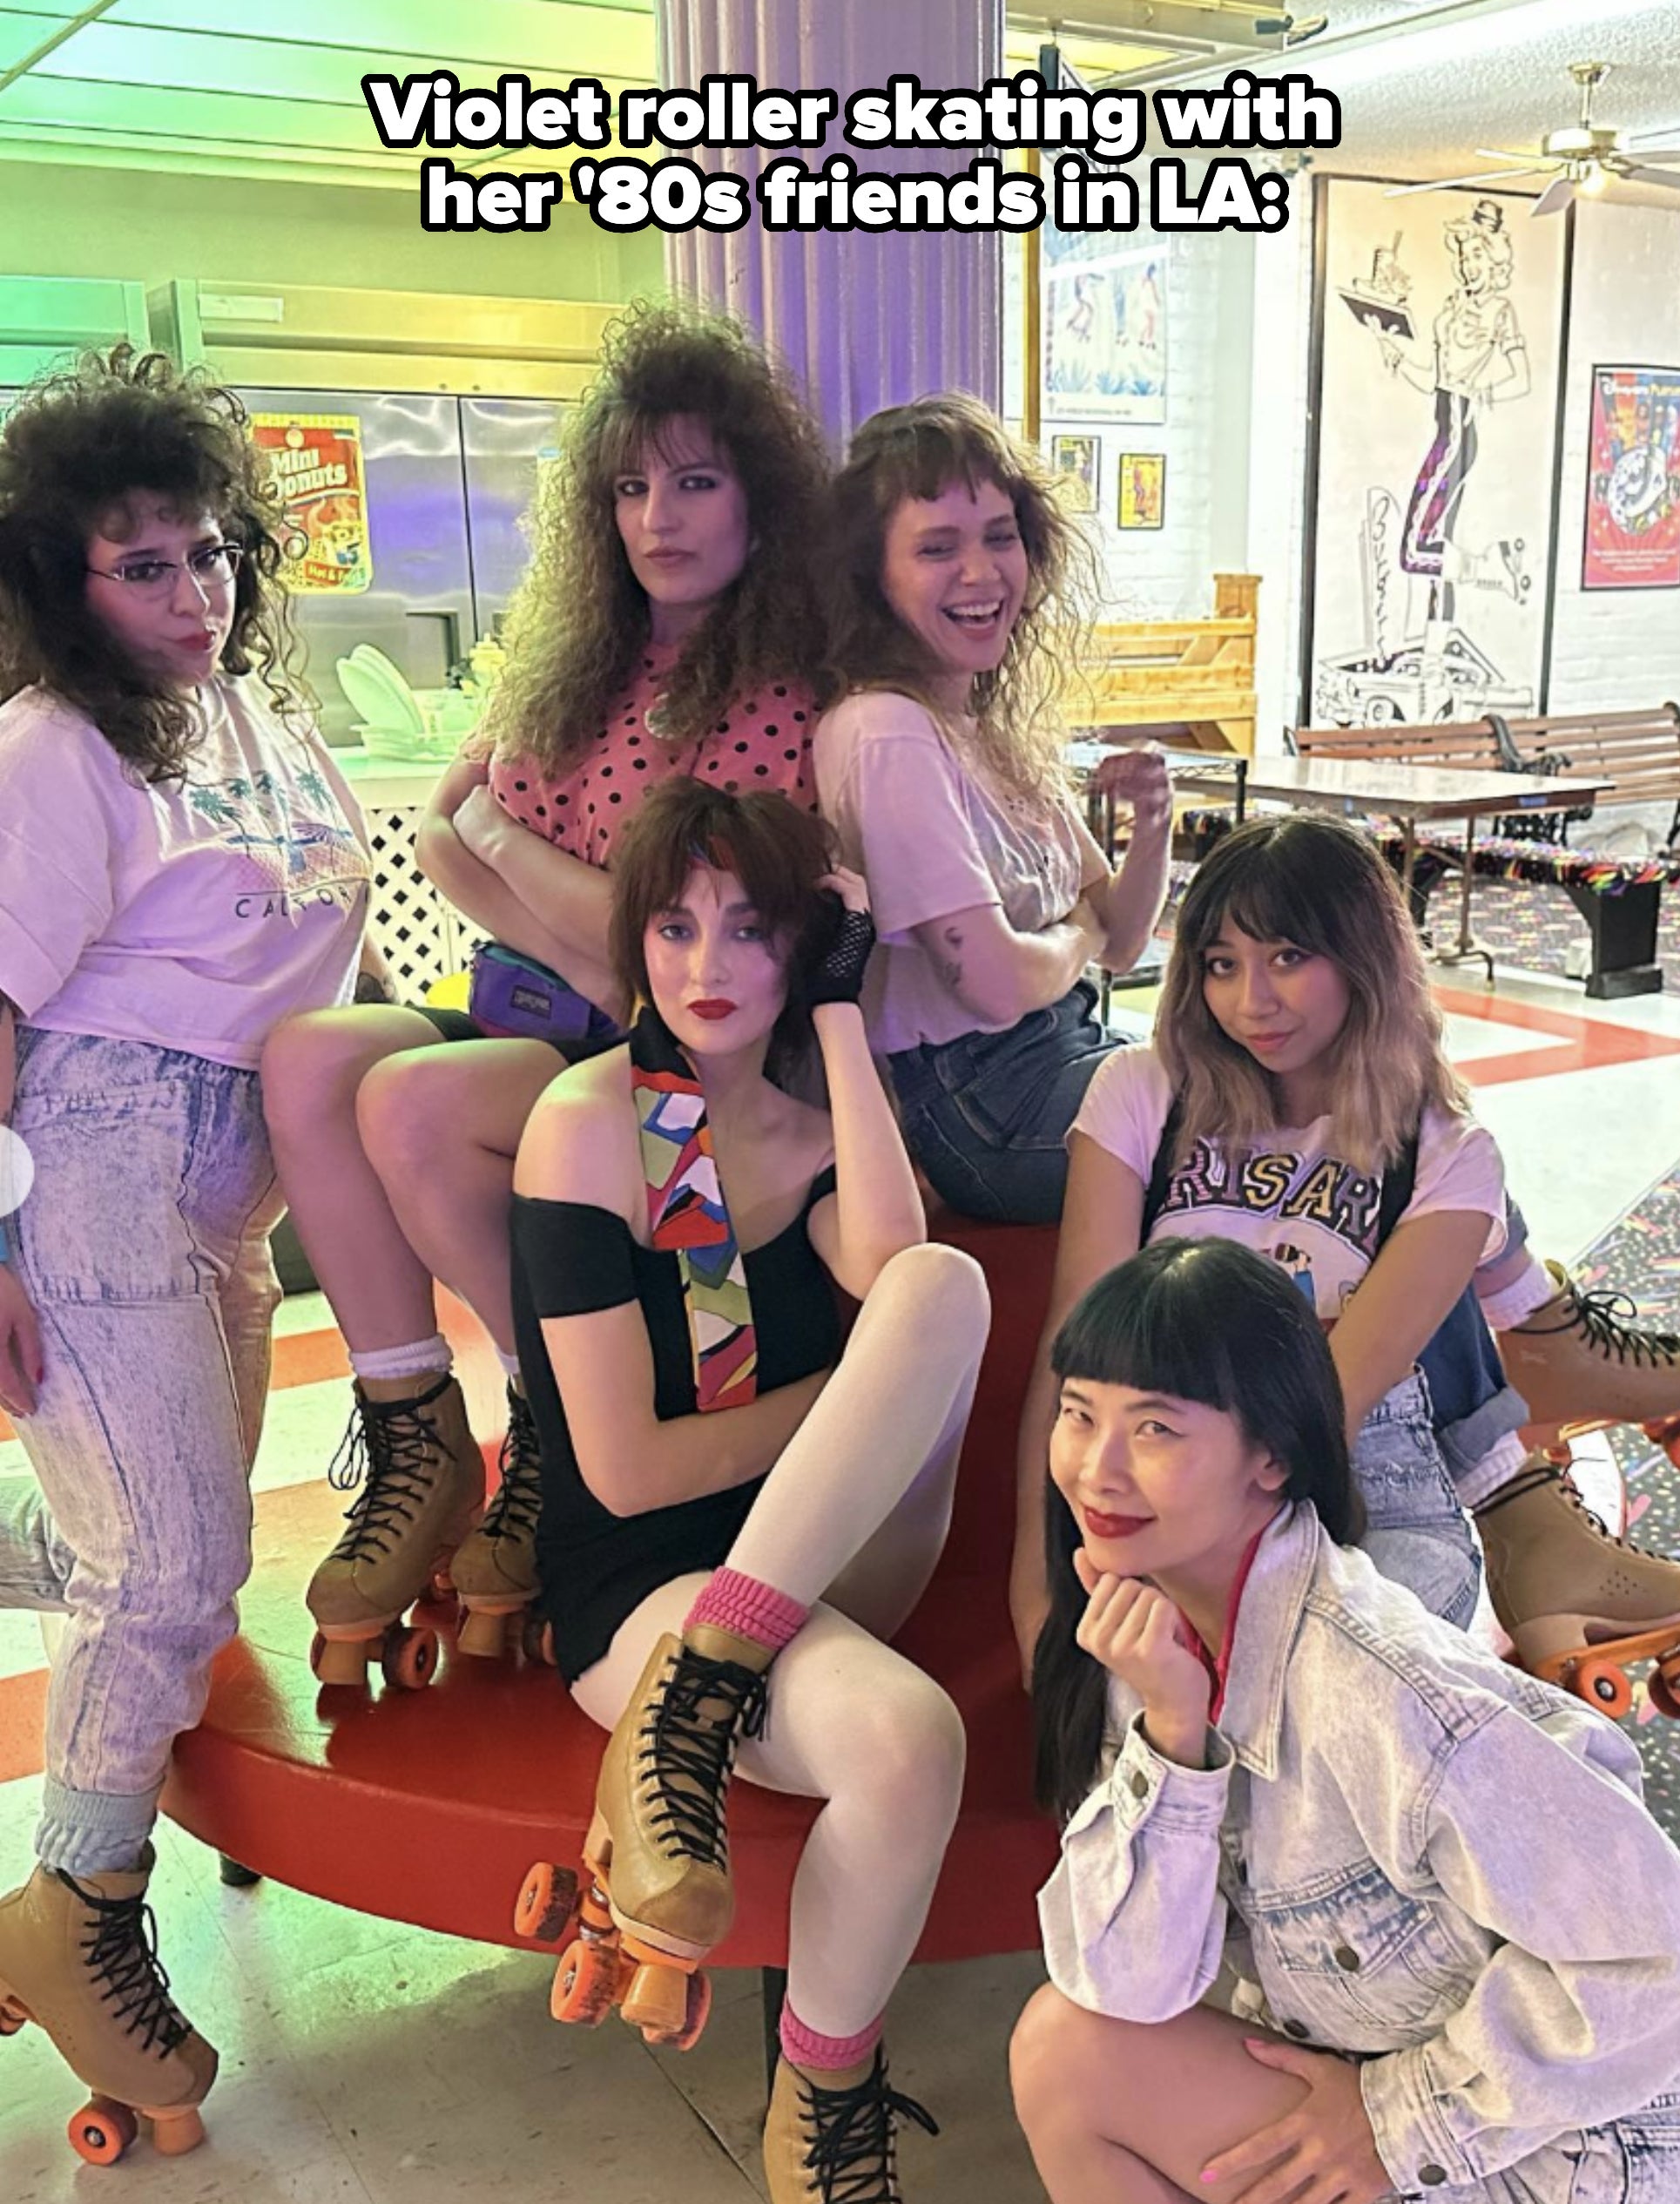 Six women posing in roller skates in a retro-themed setting. They have different poses and expressions, each showcasing unique fashion styles